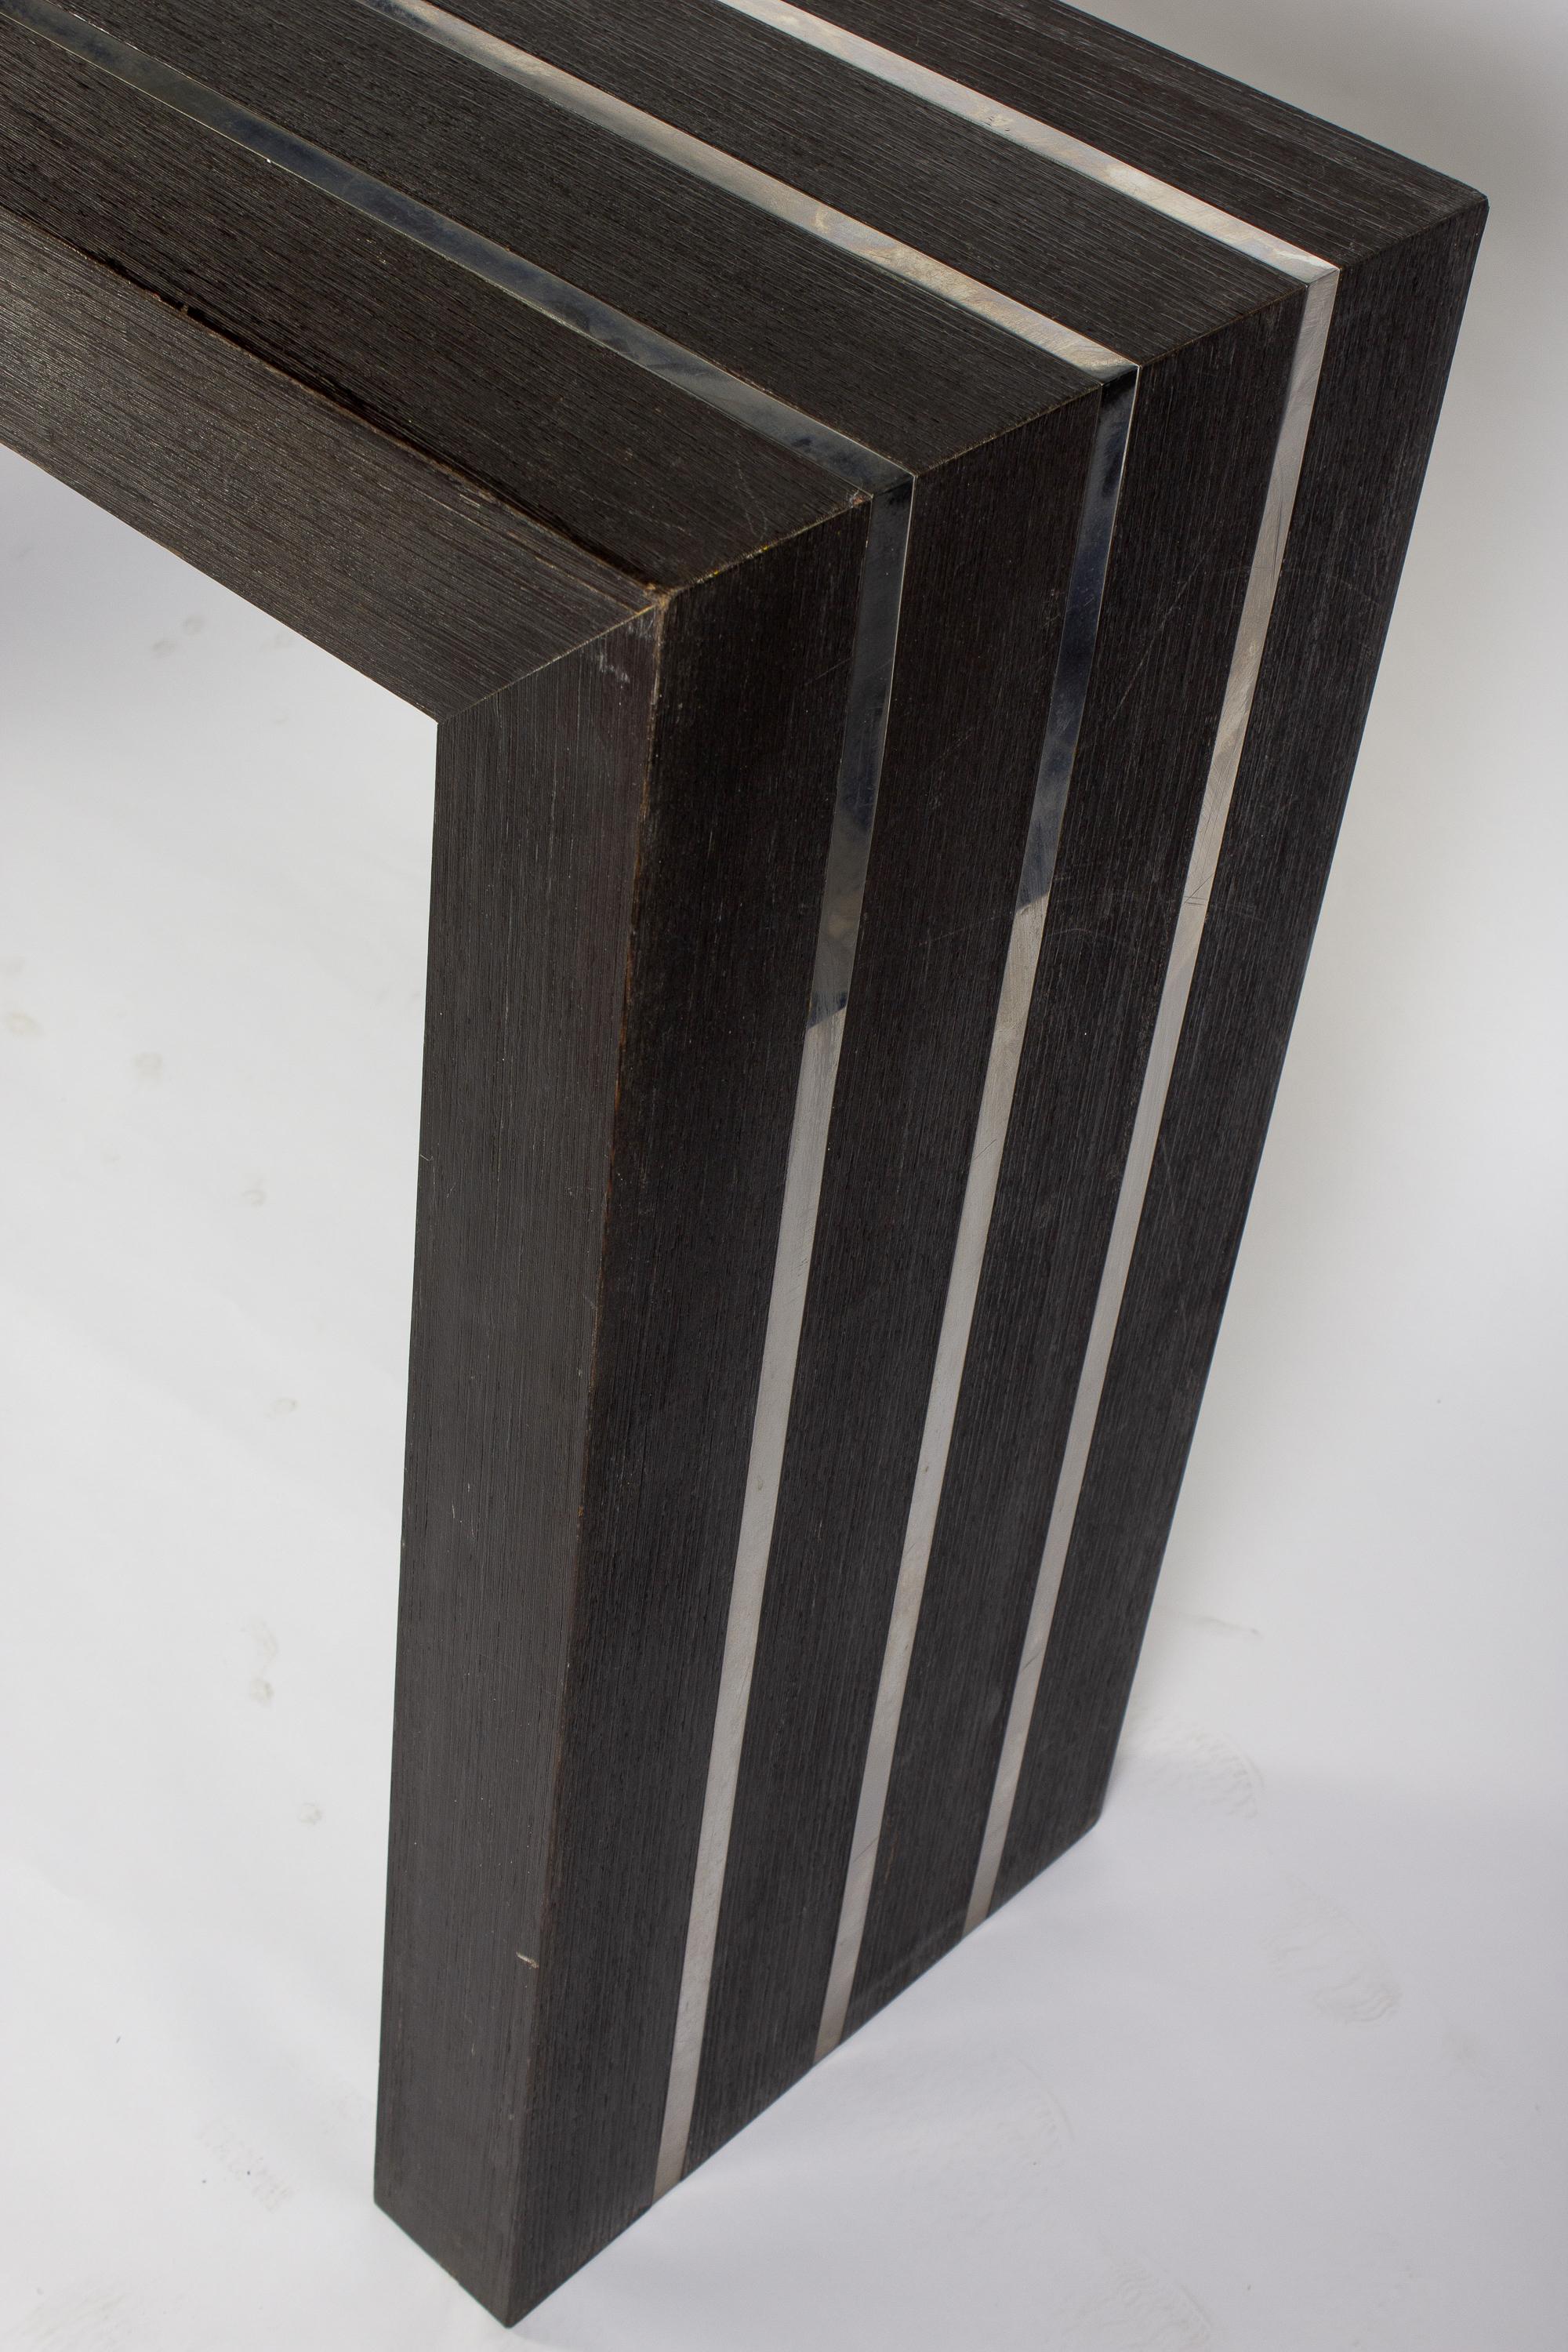 Late 20th Century Italian Modernist Dark Wood and Steel Console Table For Sale